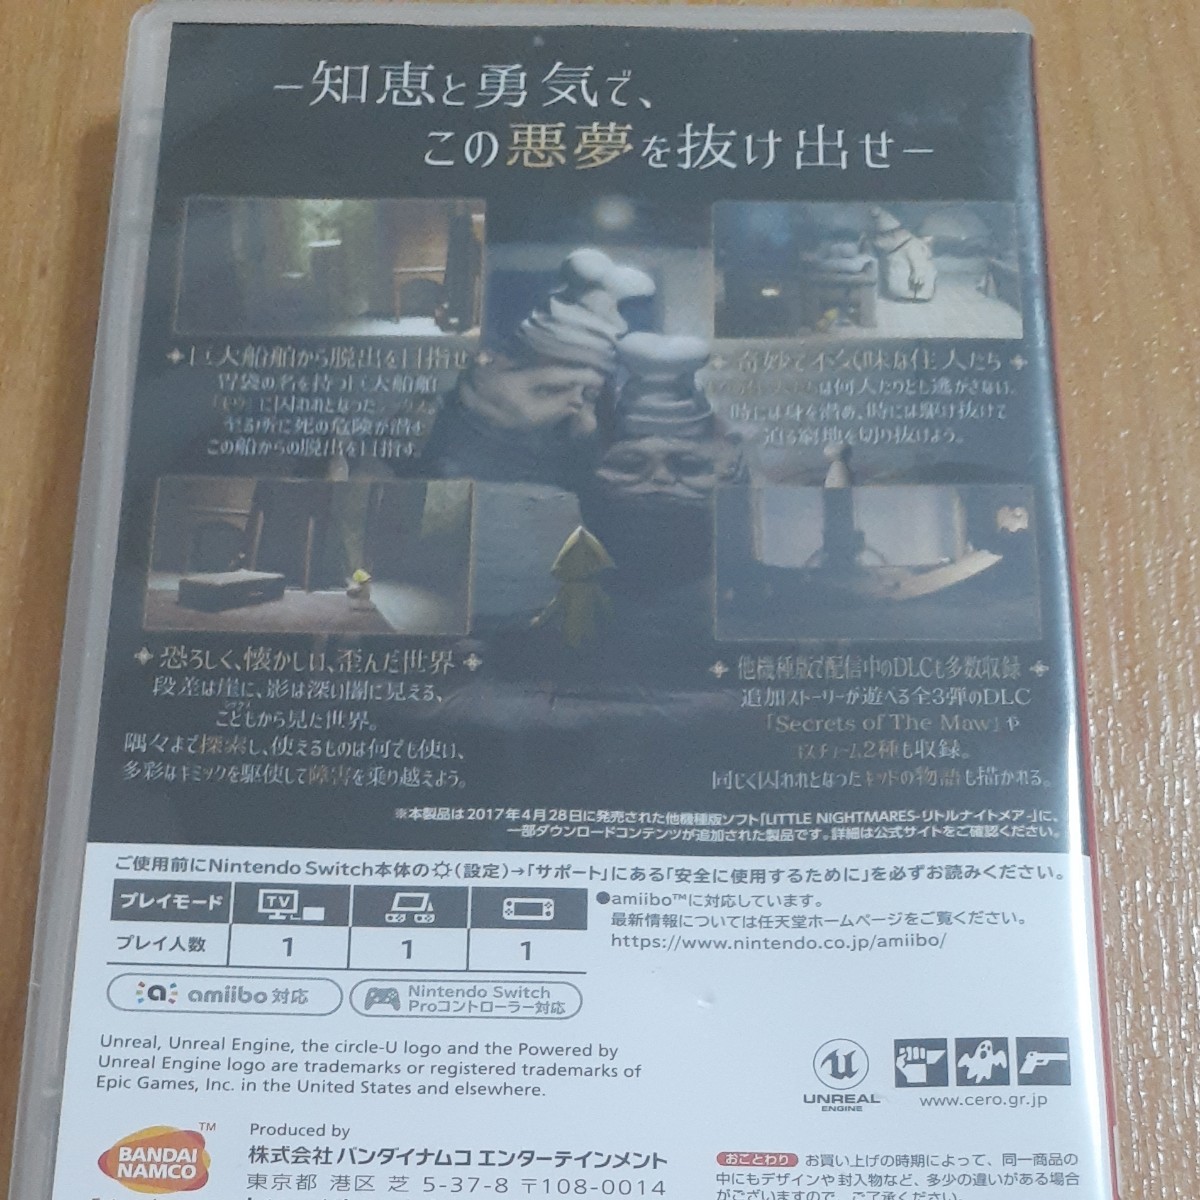 【Switch】 LITTLE NIGHTMARES-リトルナイトメア- Deluxe Edition PS4